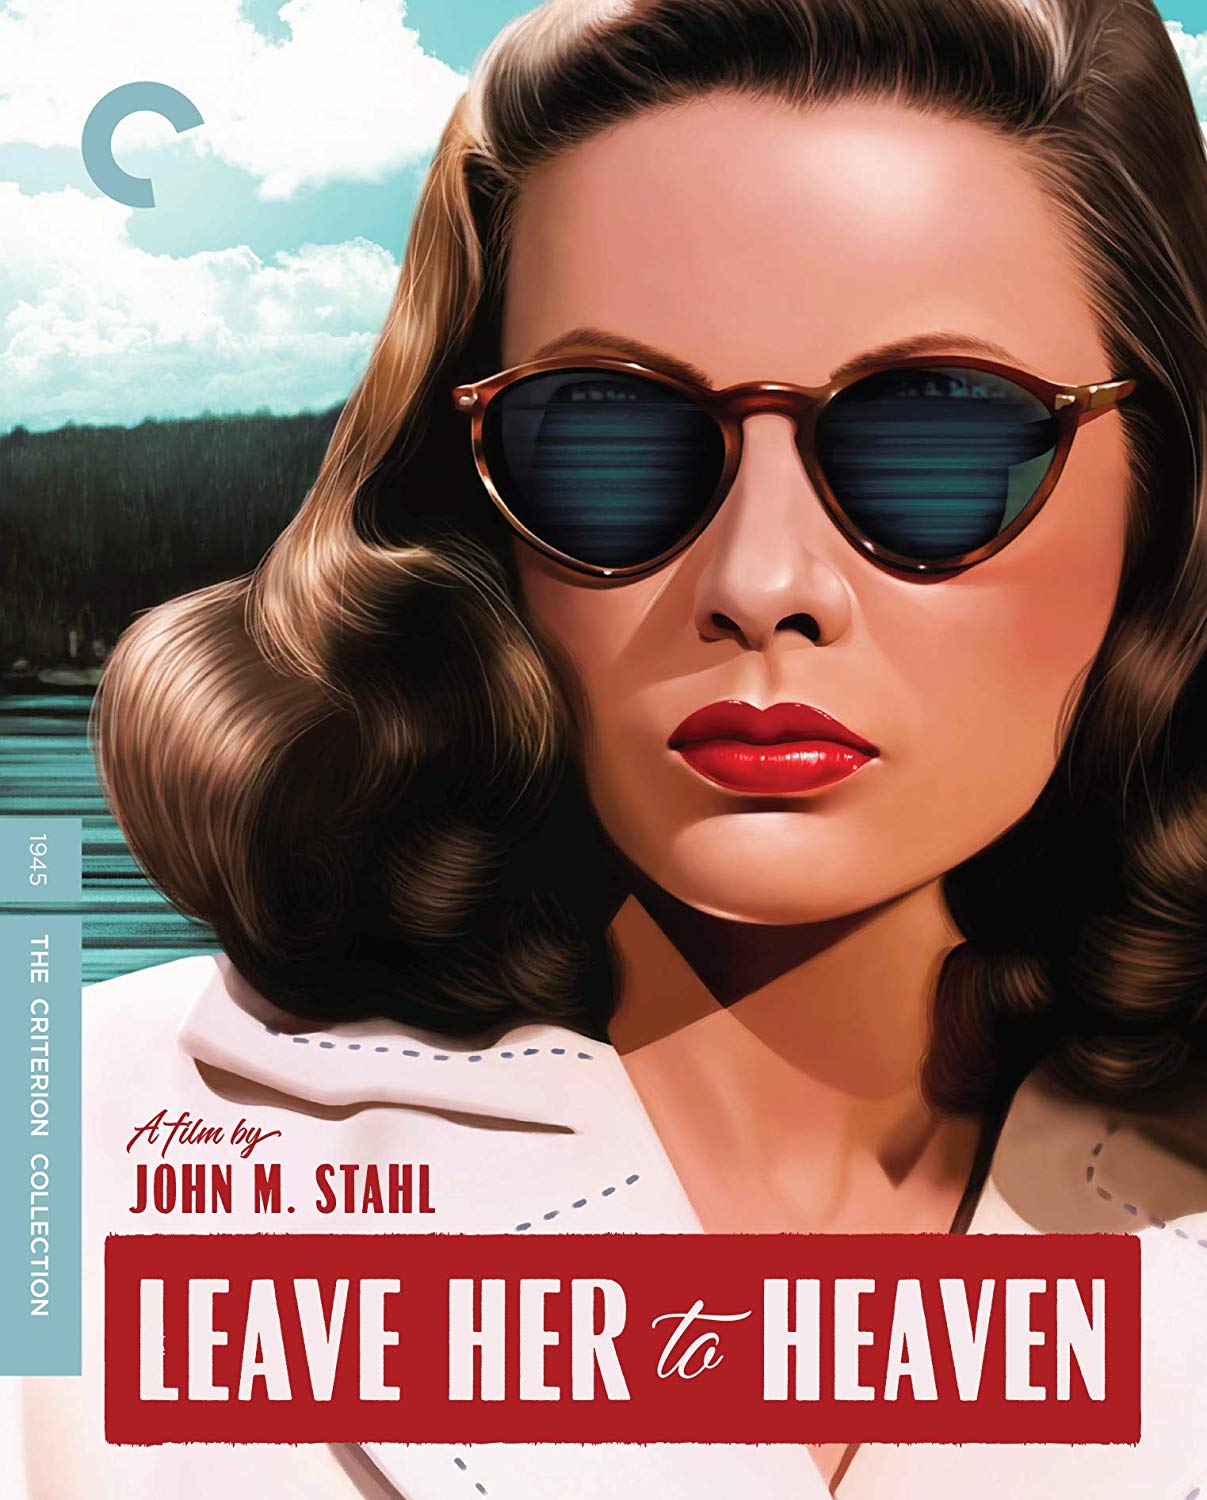 Leave Her to Heaven [Criterion Collection] [Blu-ray] cover art